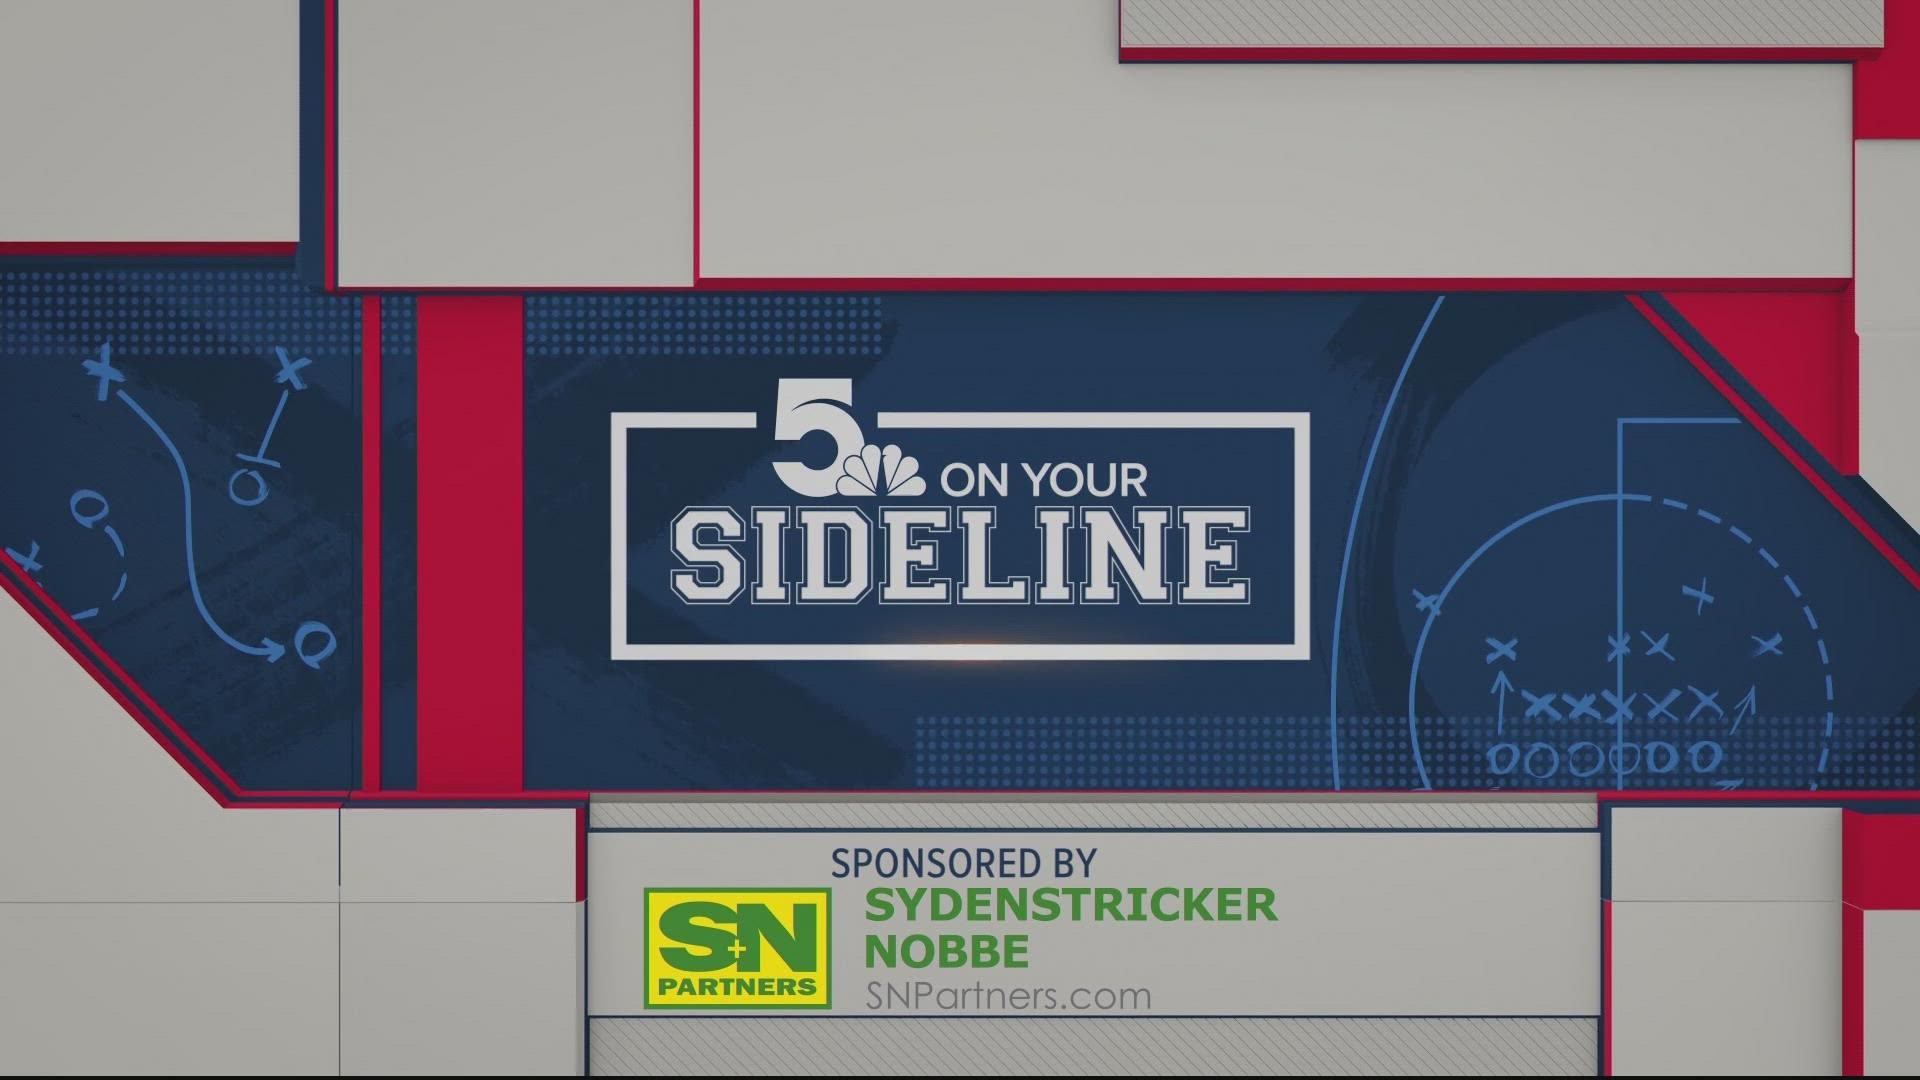 The latest sports news and highlights from the St. Louis area on this week's 5 On Your Sideline.